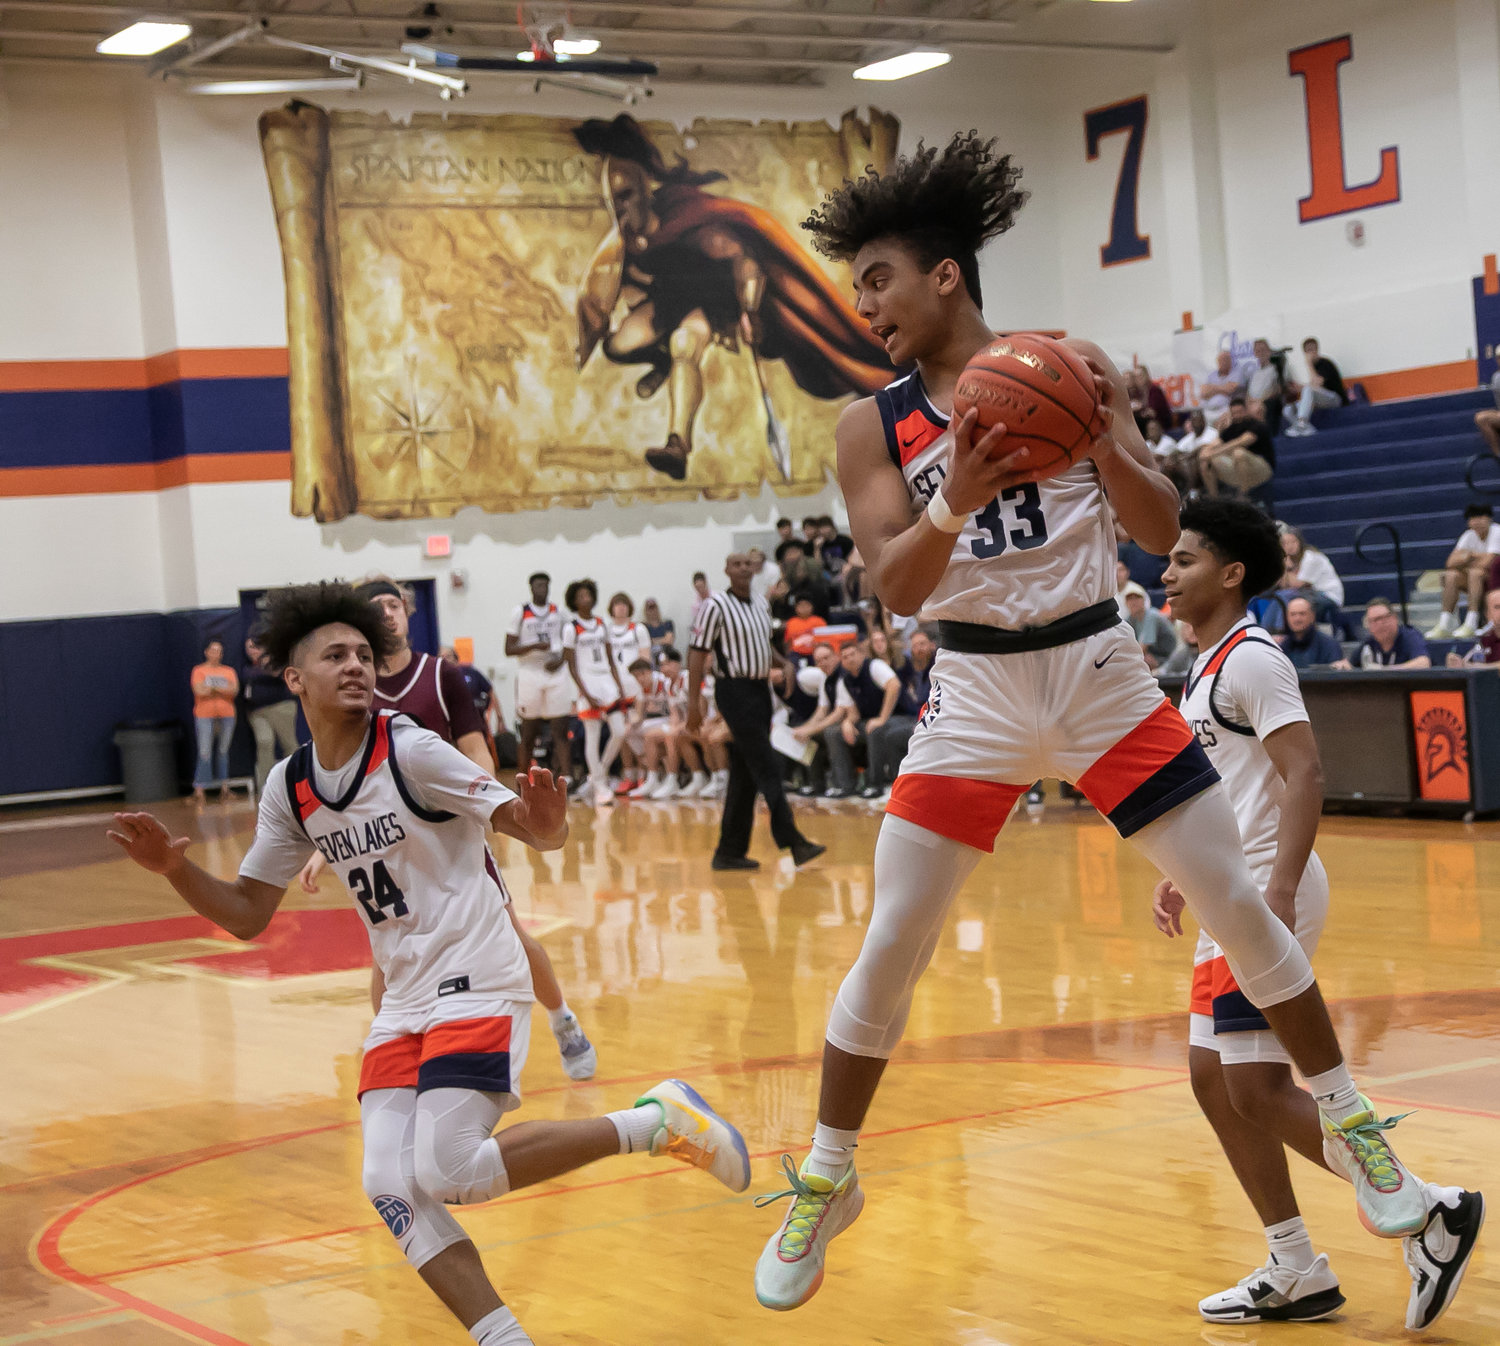 Tillman Jaramillo comes down with a rebound during Saturday's game between Seven Lakes and Cinco Ranch at the Seven Lakes gym.